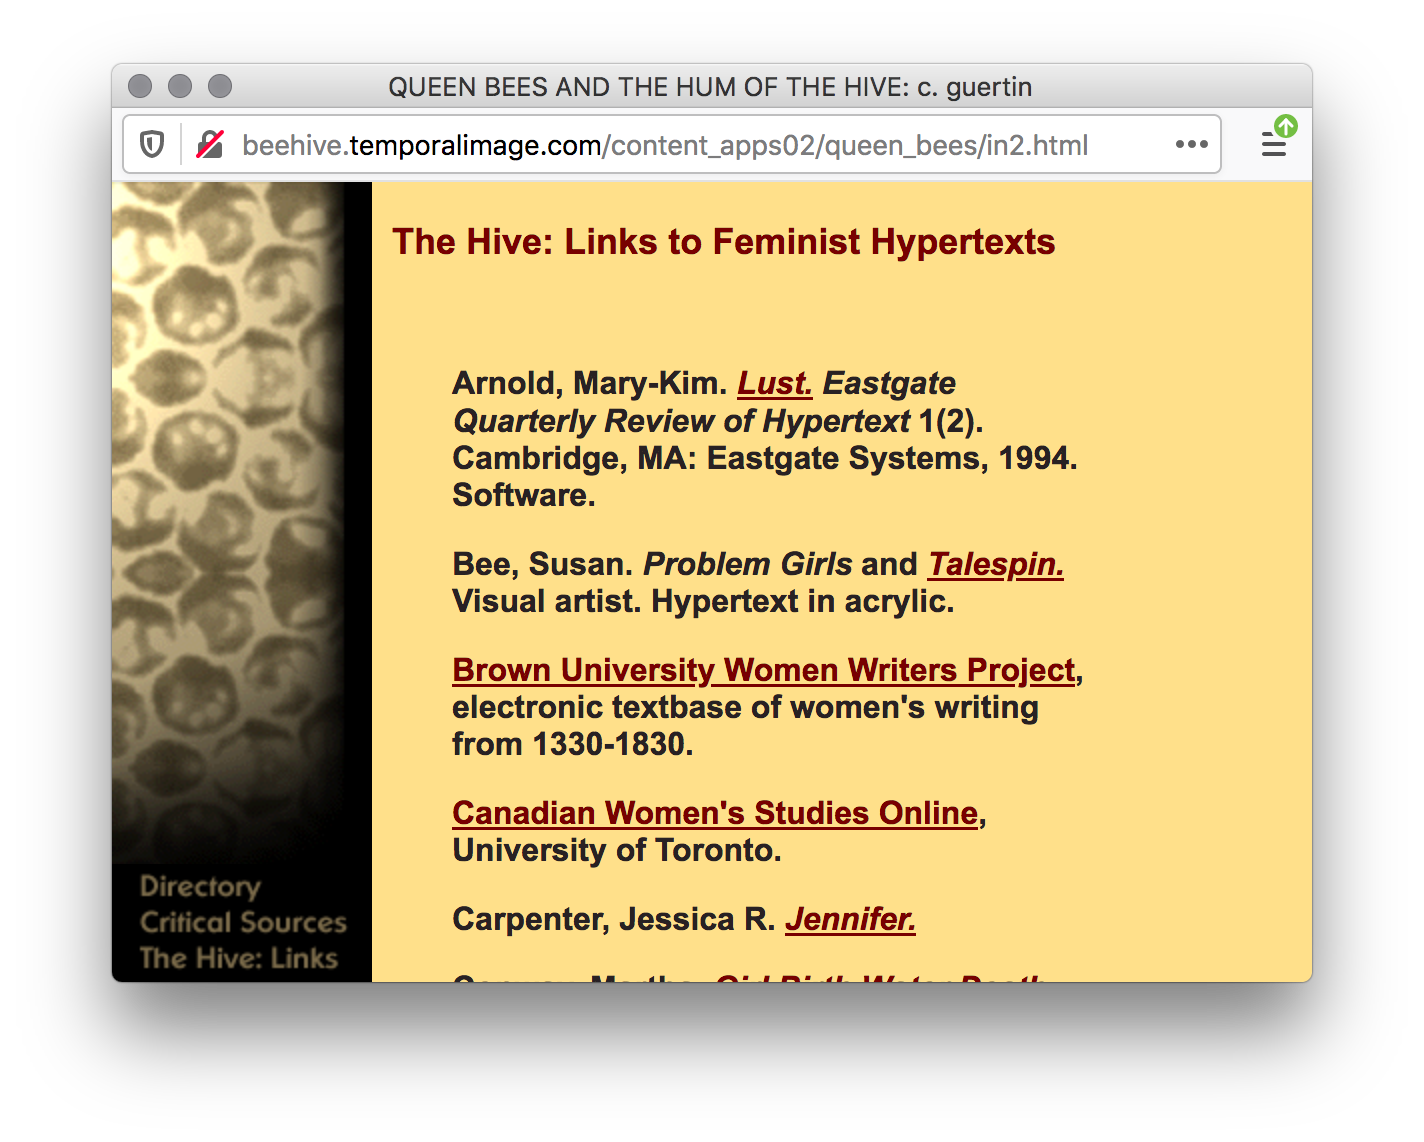 Screenshot of a yellow webpage with a column of an honeycomb pattern image on the left. The rest of the page is filled with black and red underlined text links to various hypertexts.